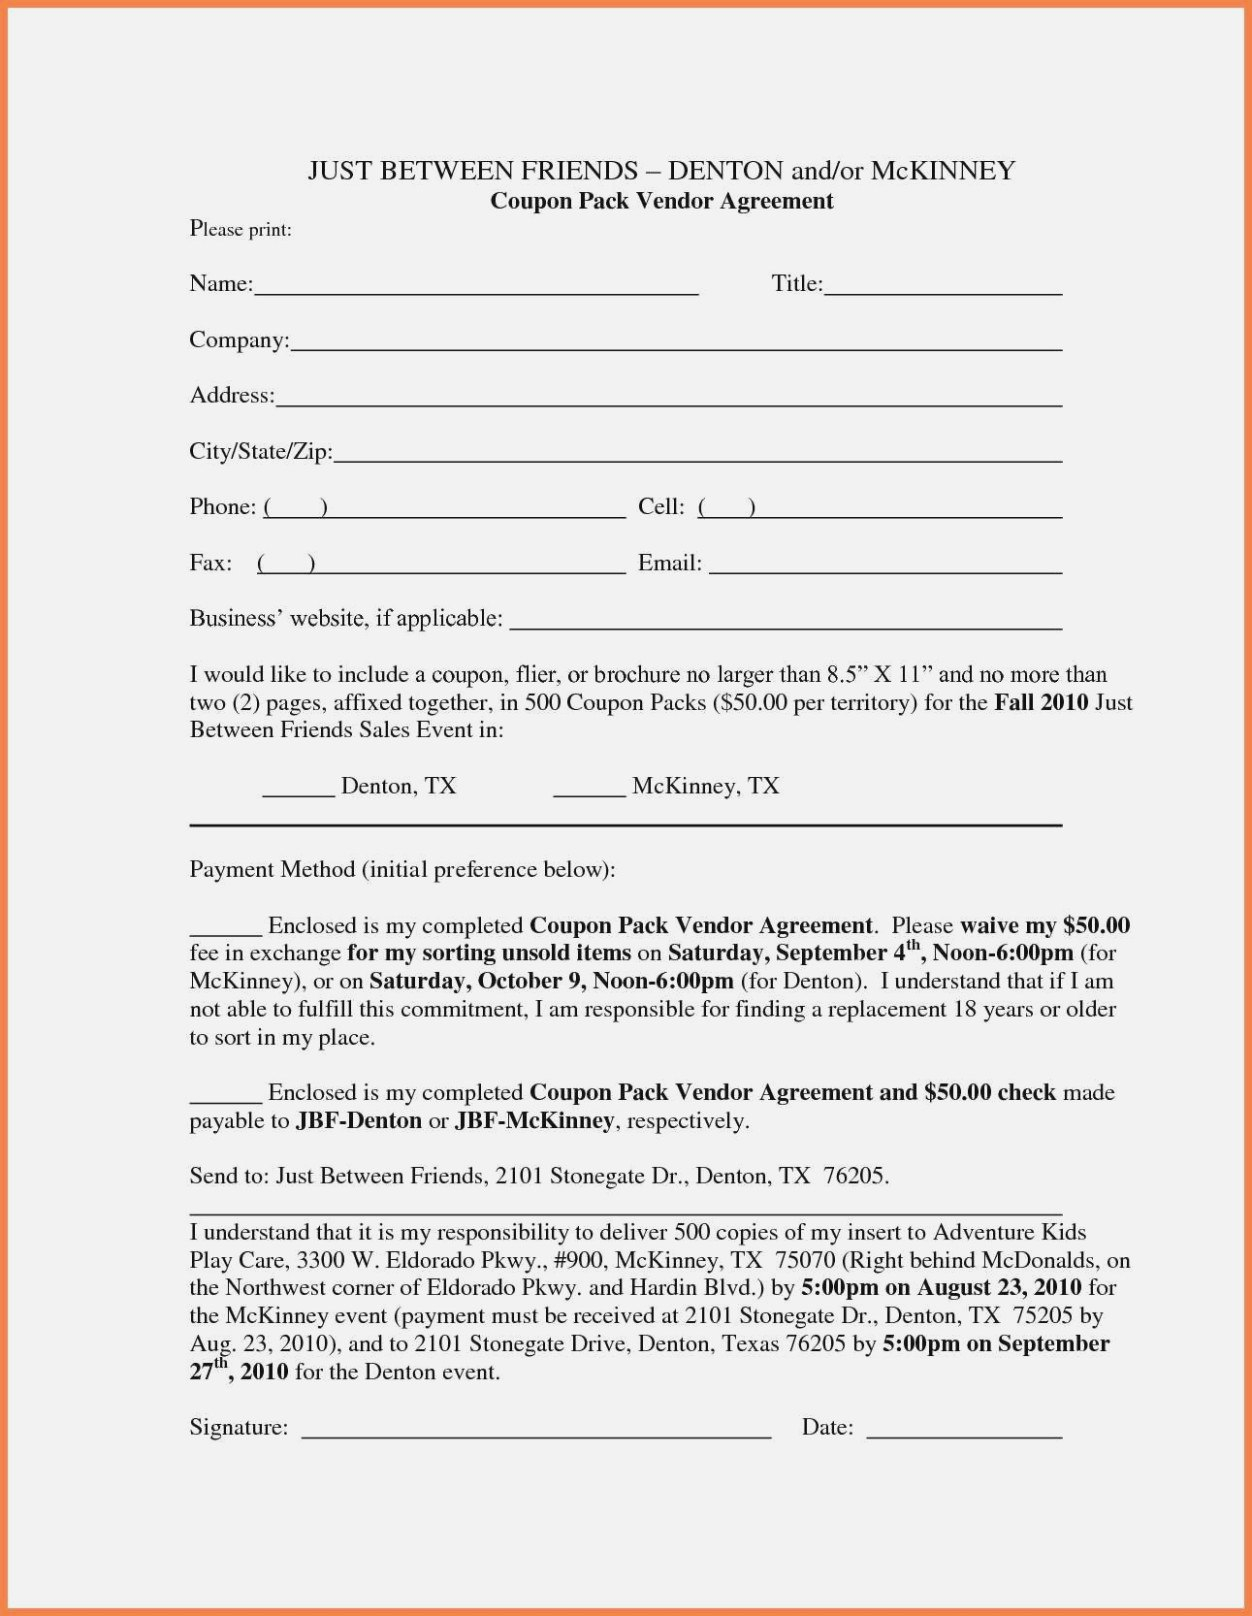 Sample Loan Agreement Between Family Members Unique Lma Form Loan with regard to Lma Loan Agreement Template